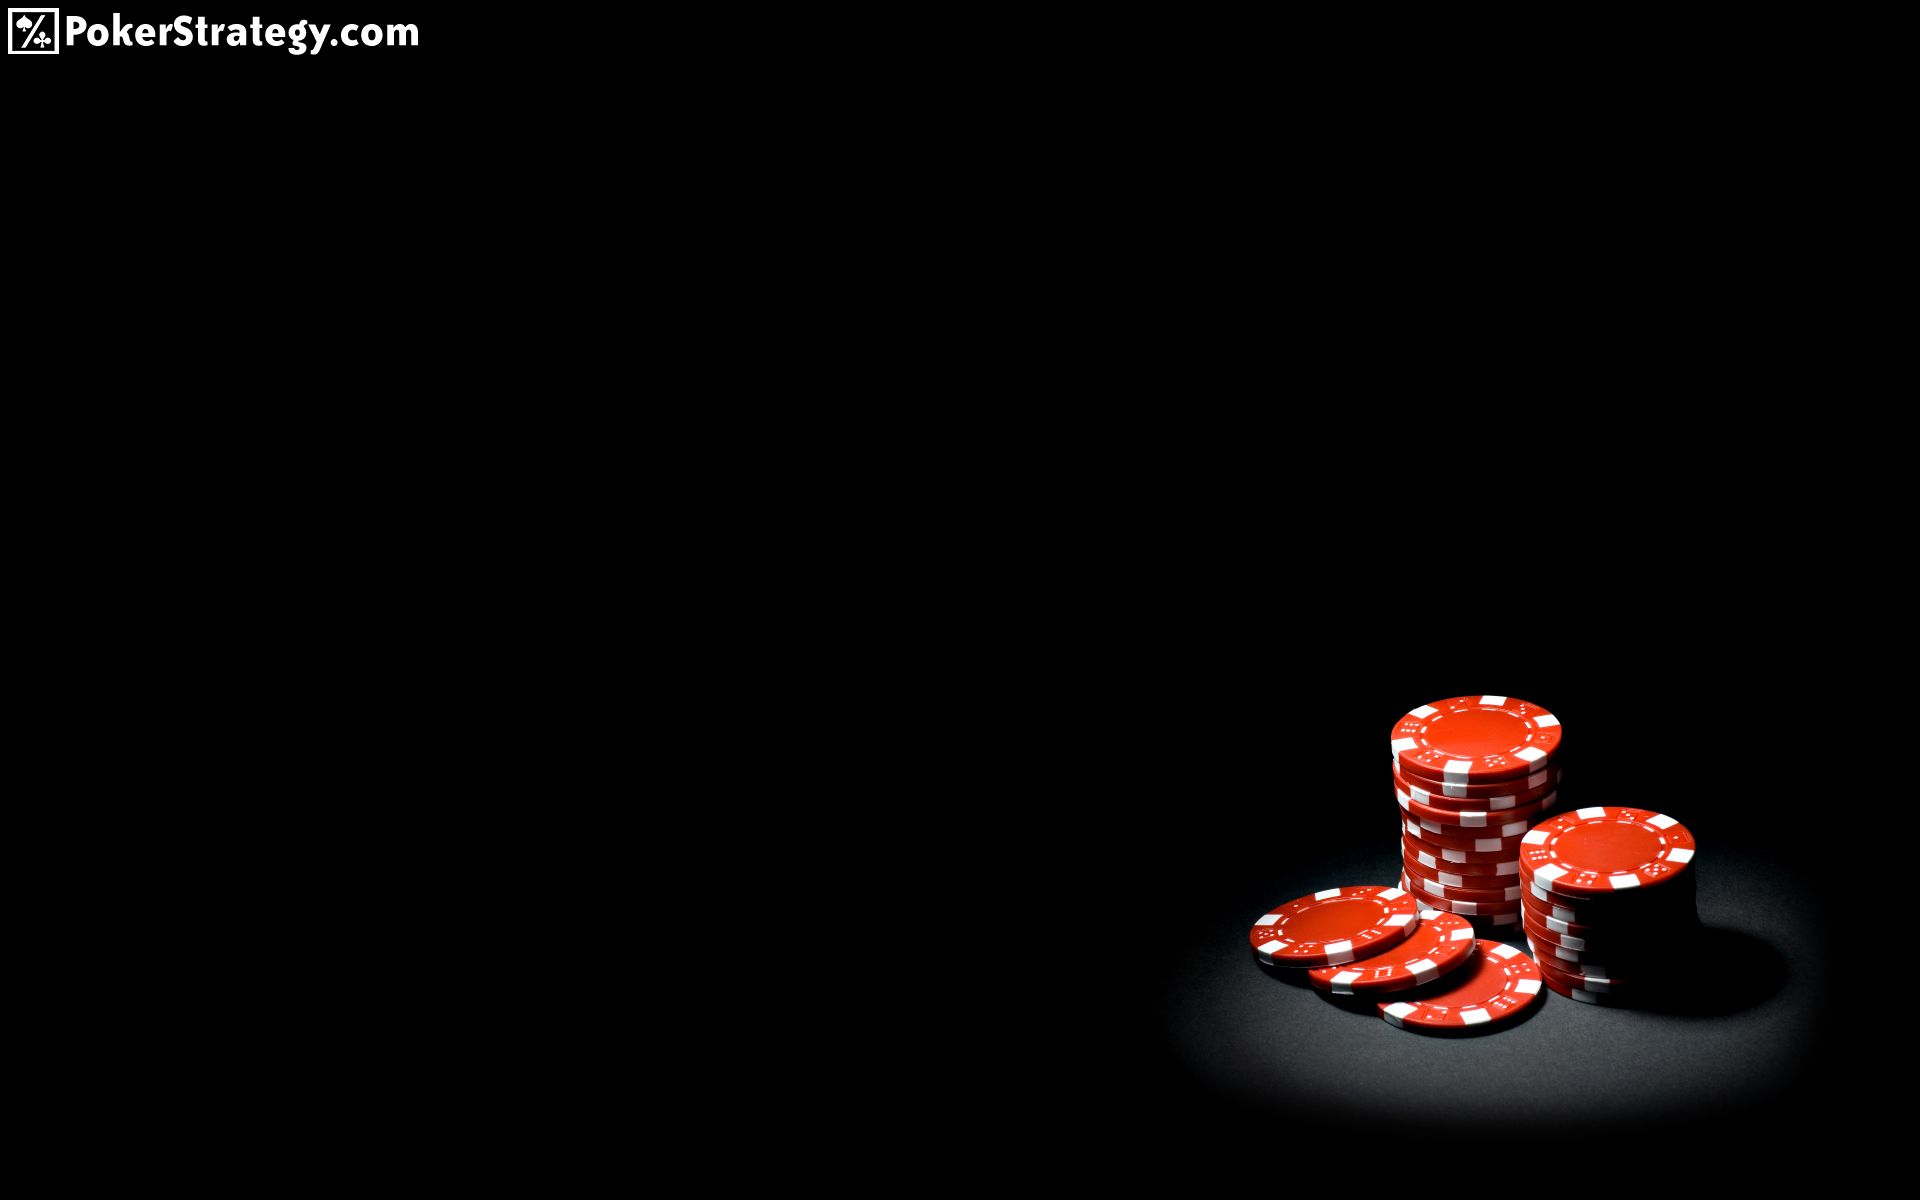 We allow casinos to engage a wide range of potential customers